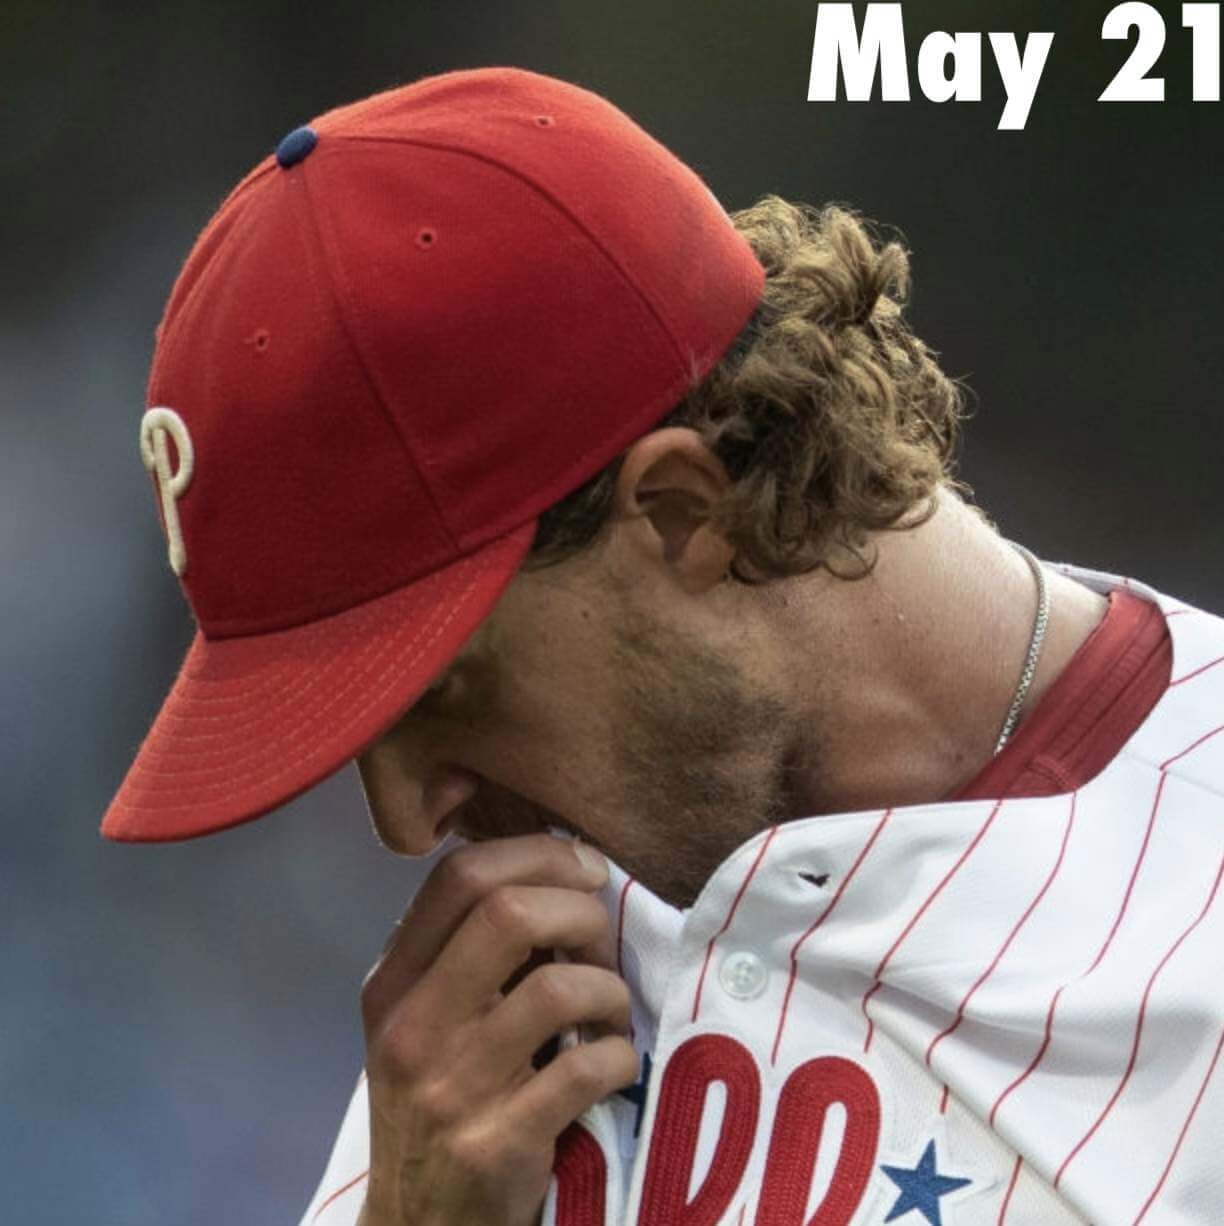 Phillies news: Aaron Nola is tired, but so are the excuses